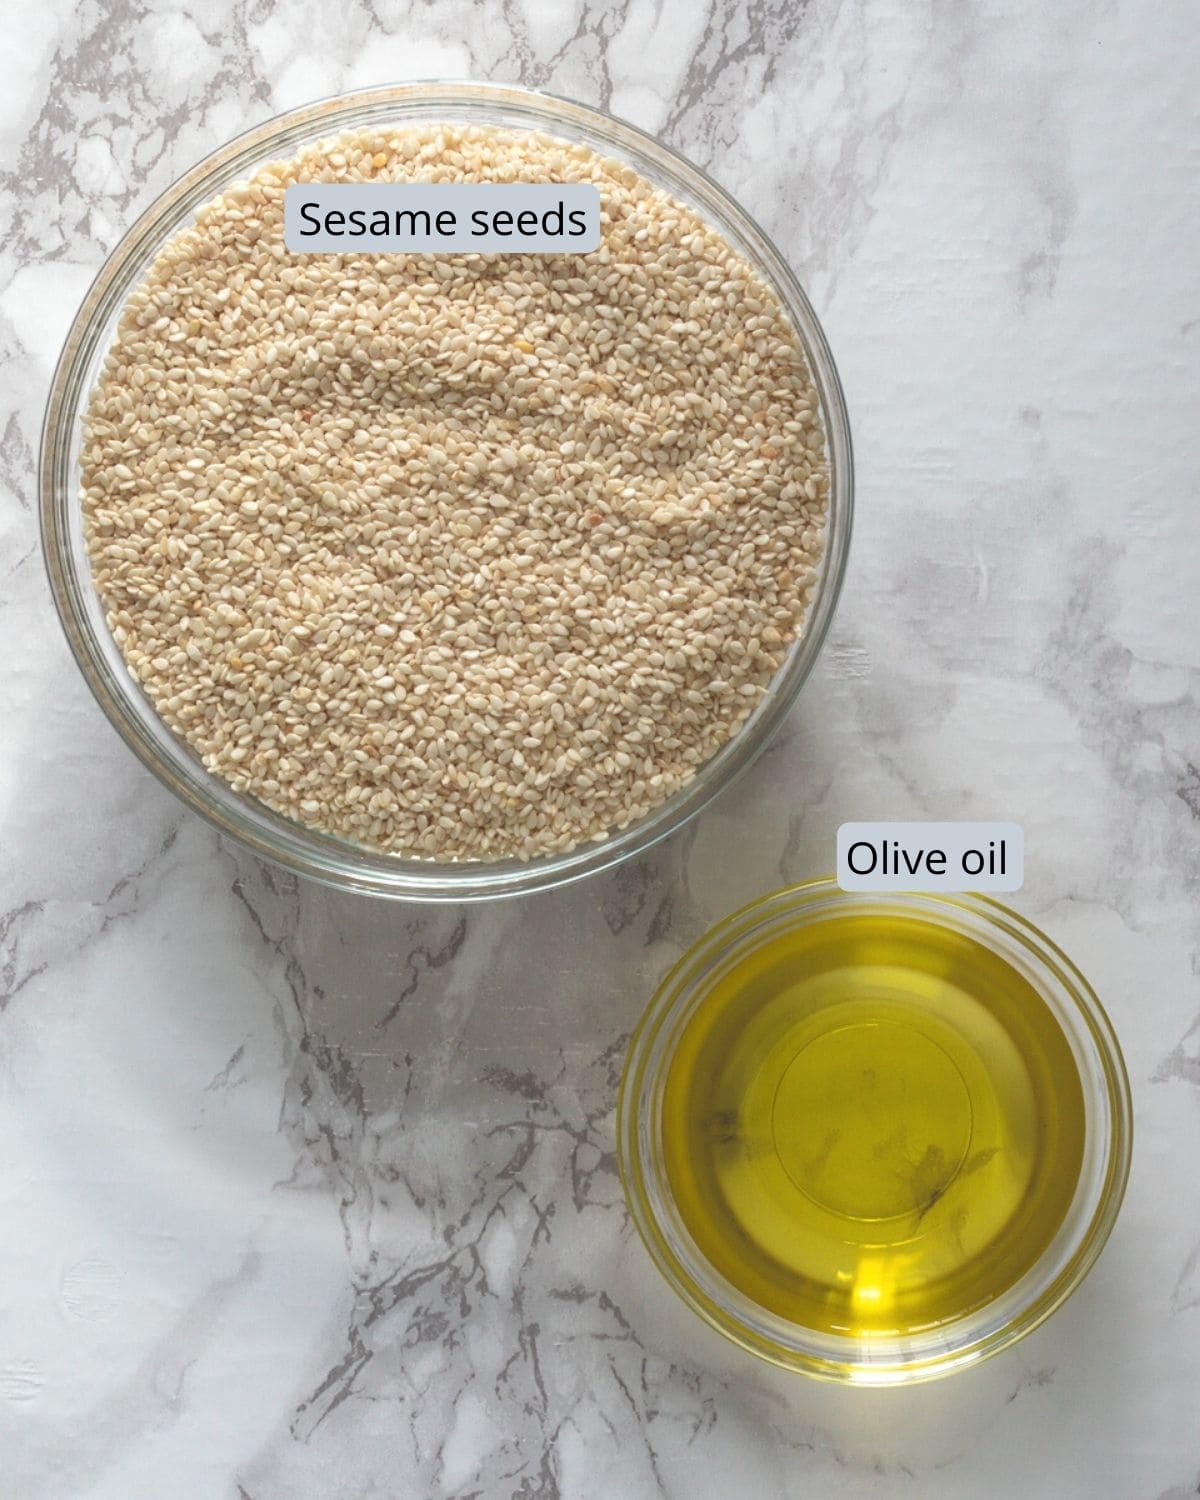 Sesame seeds and olive oil in individual bowls.